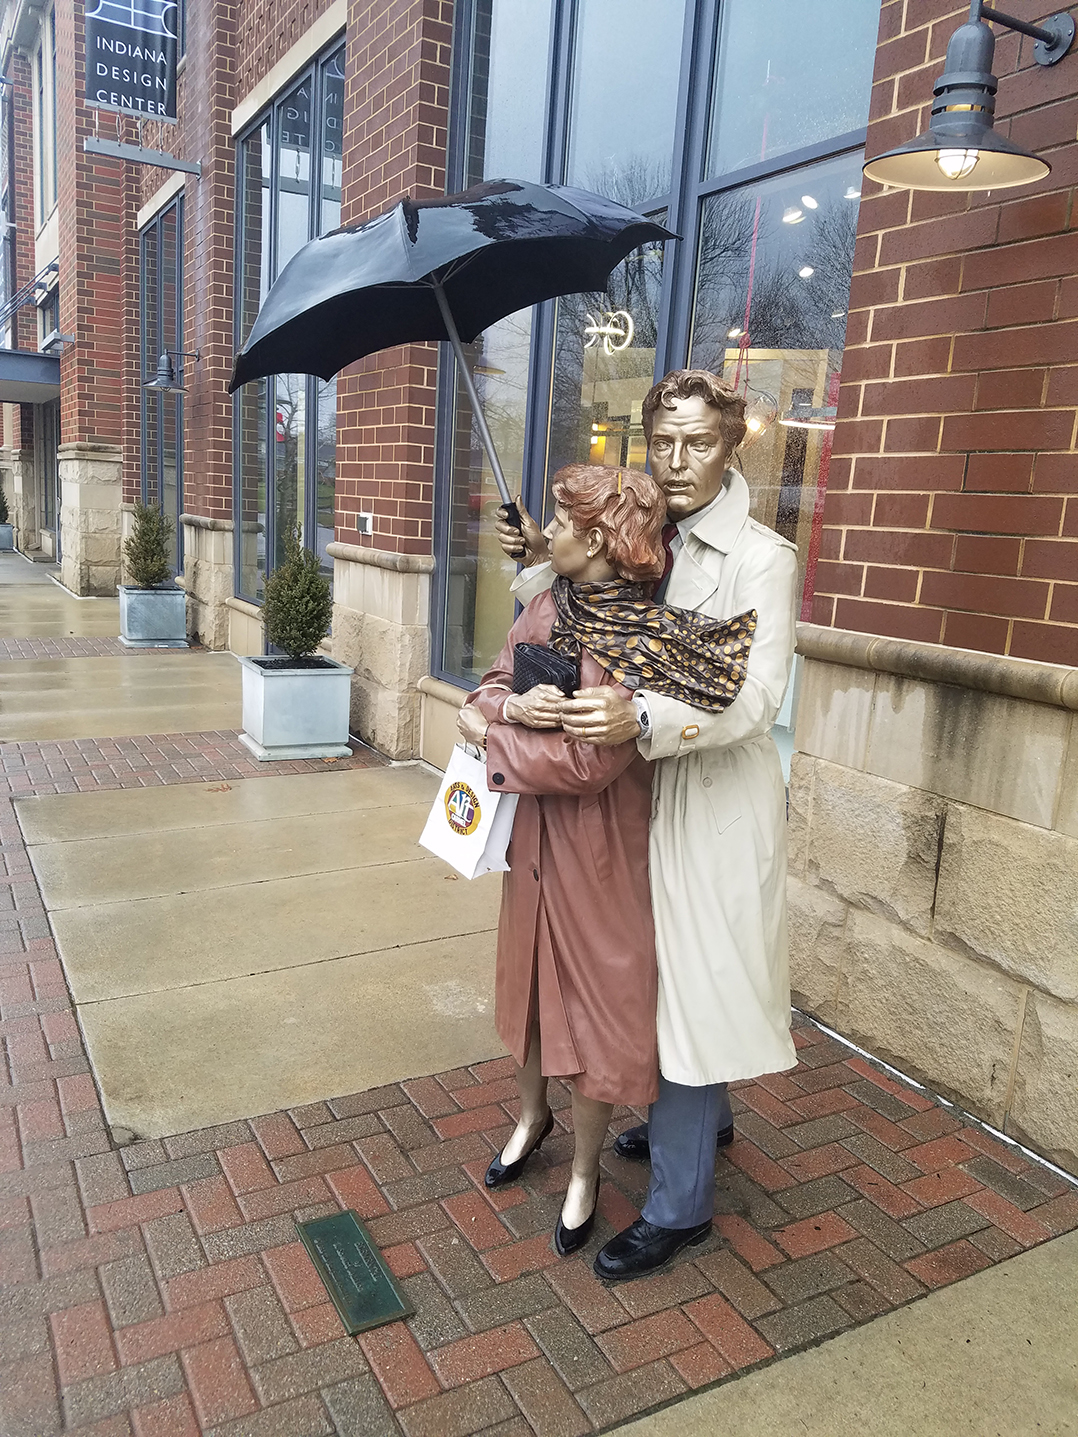 Carmel to install 5 Seward Johnson sculptures purchased in 2018